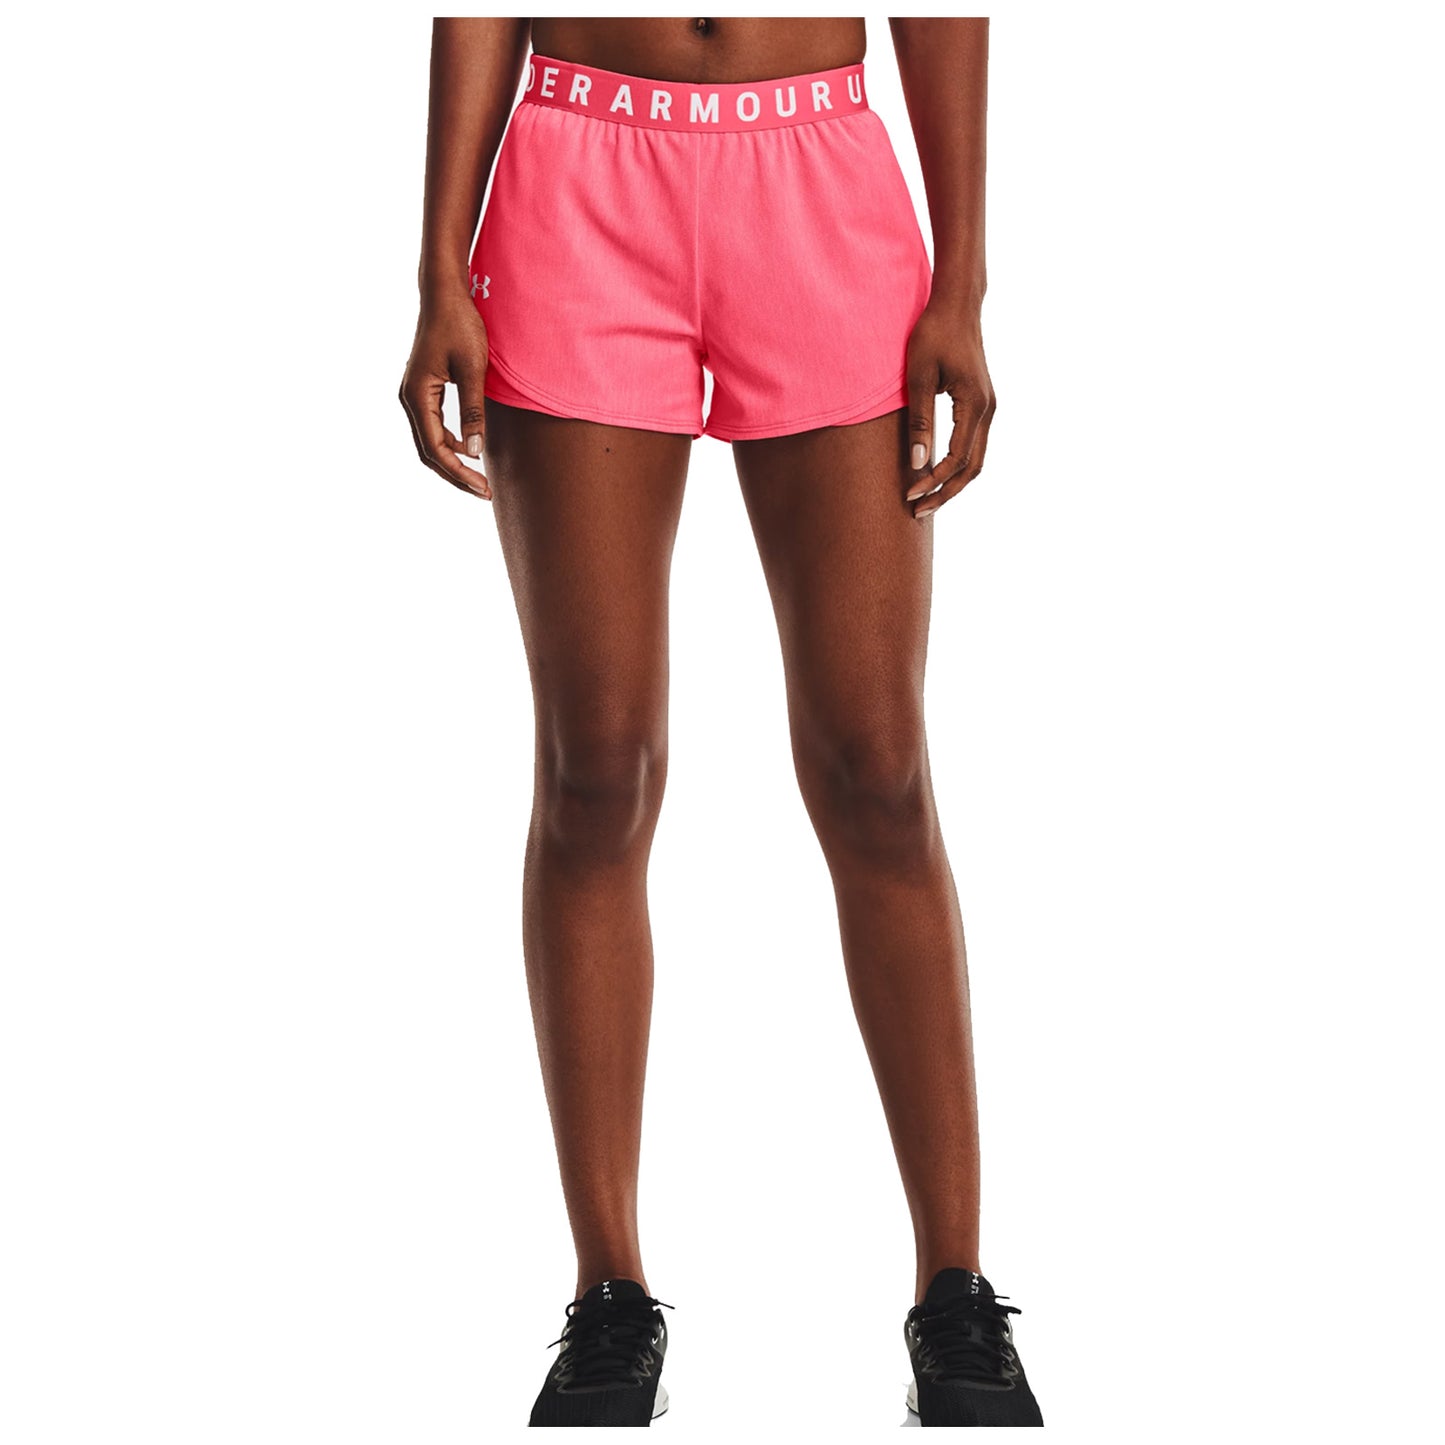 Under Armour Ladies Play Up 3.0 Twist Shorts